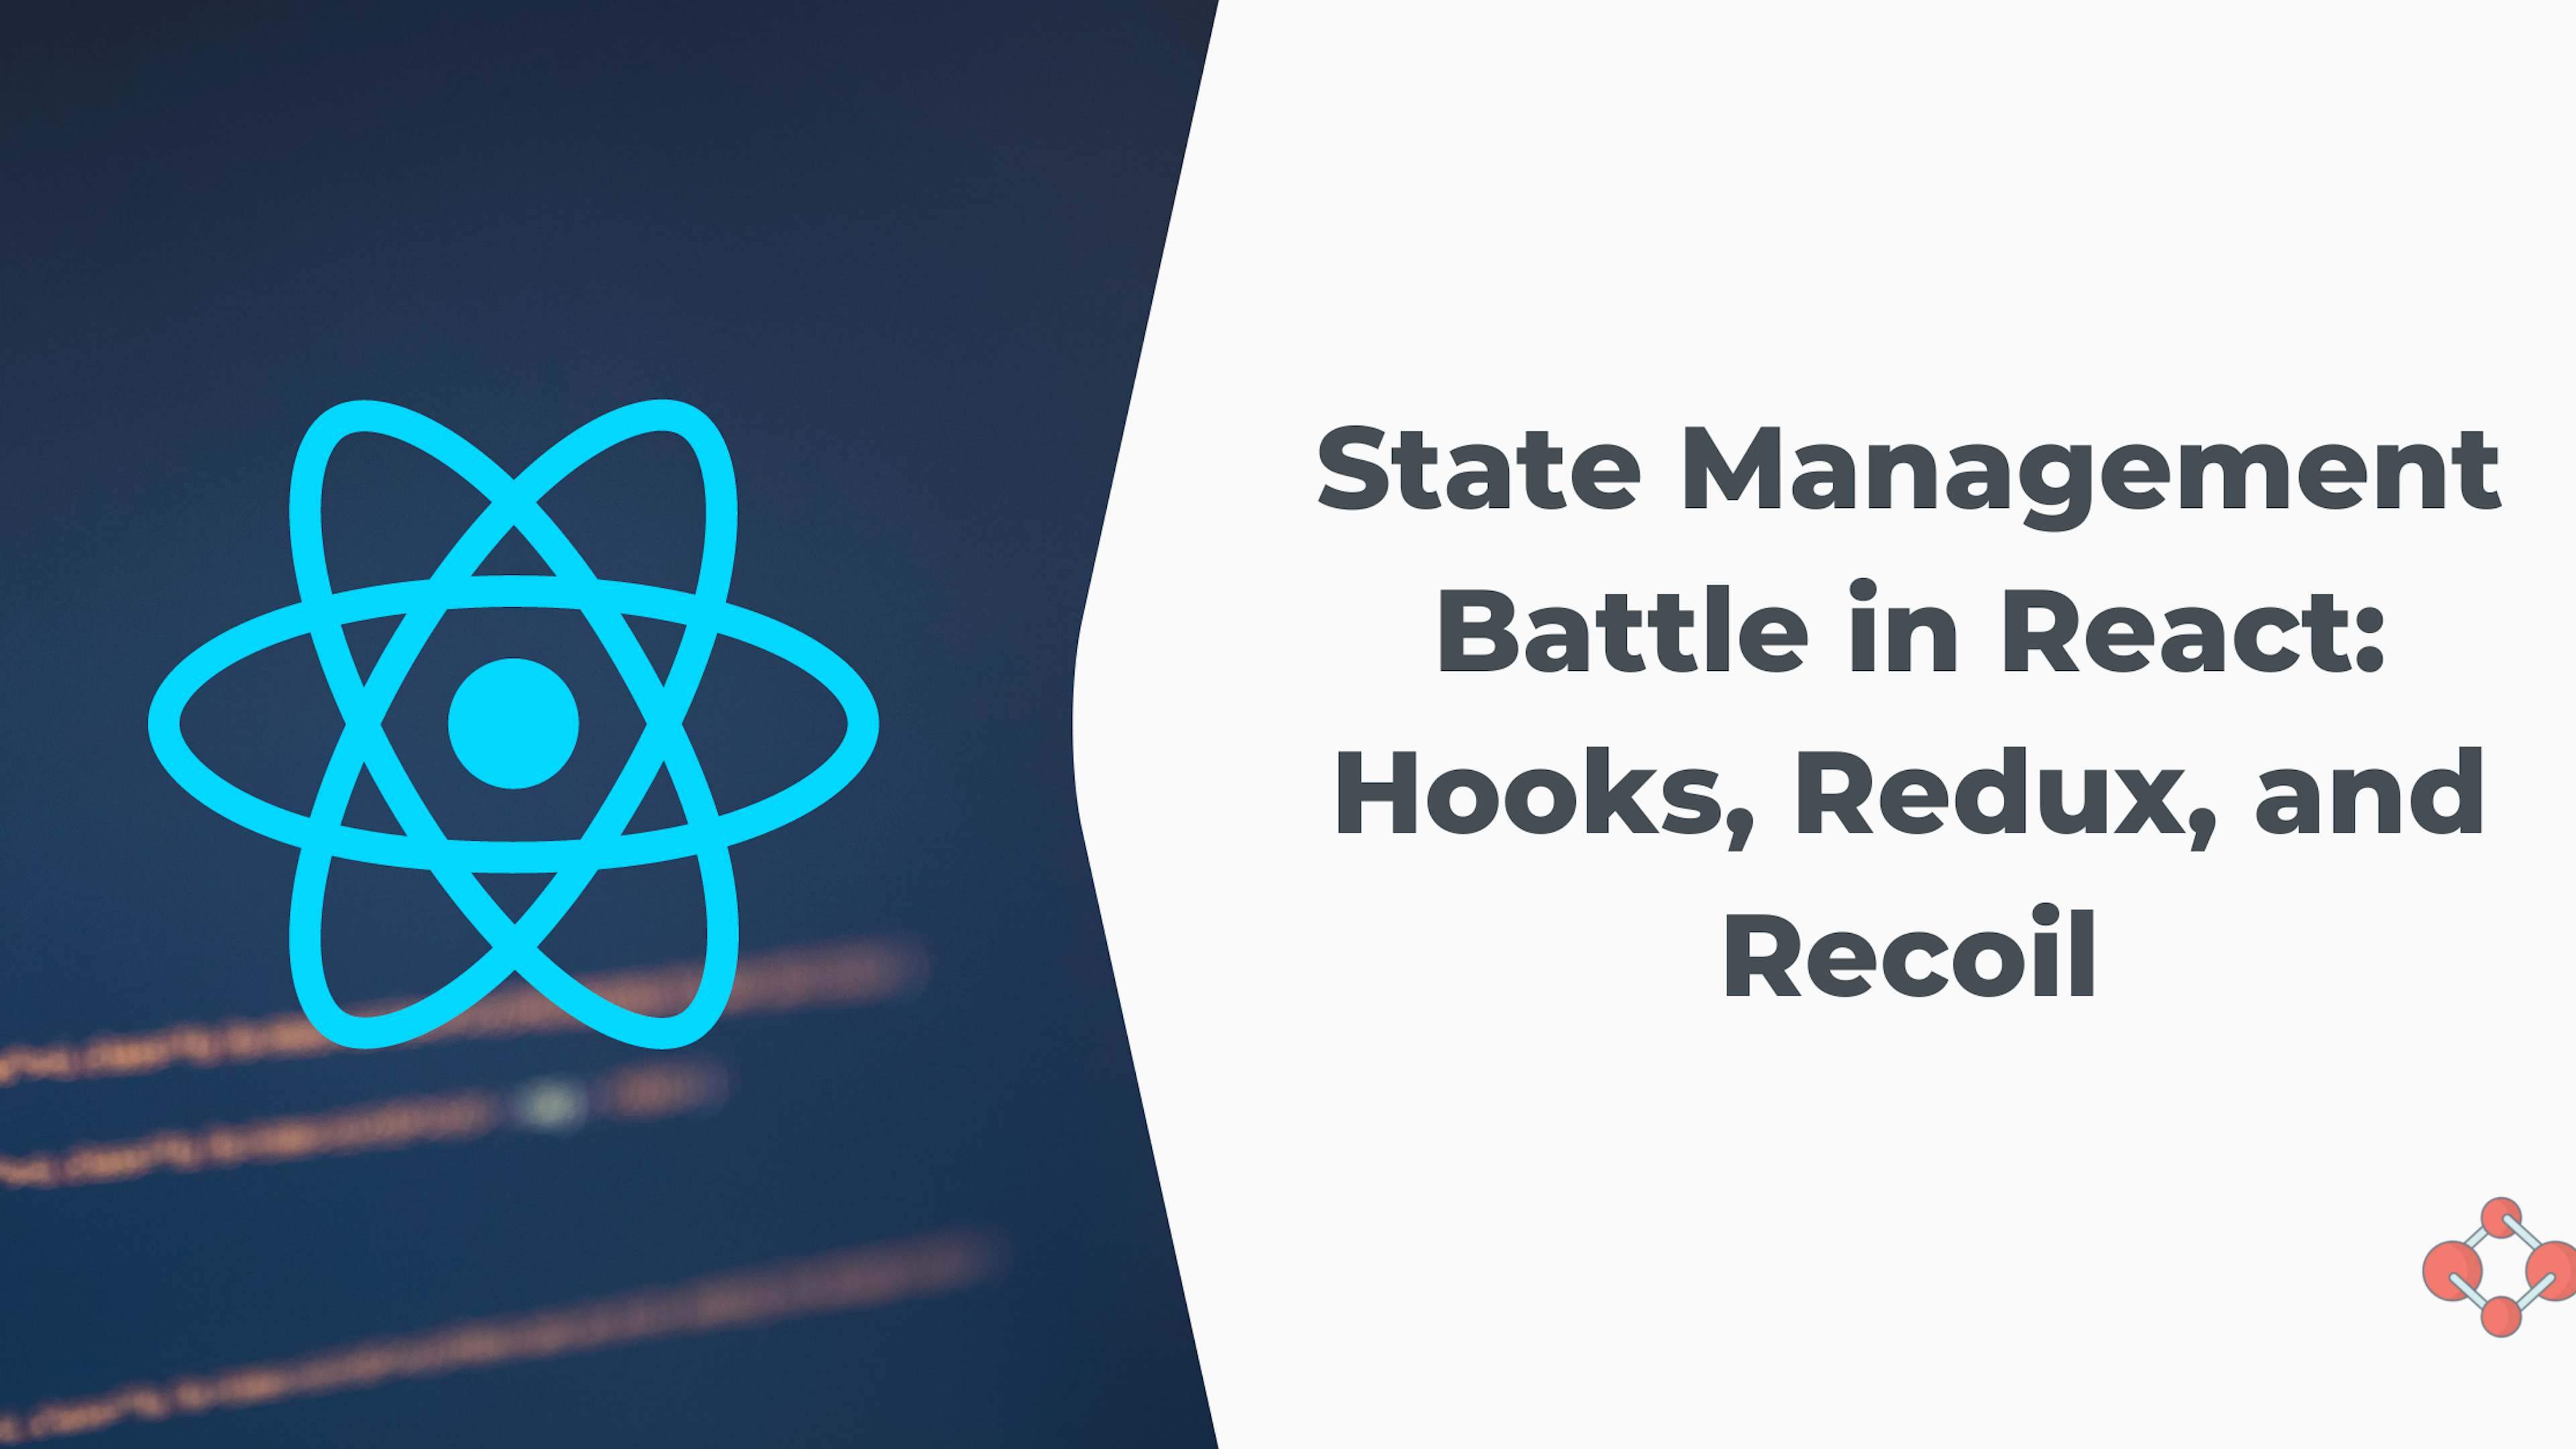 State Management Battle in React 2022: Hooks, Redux, and Recoil